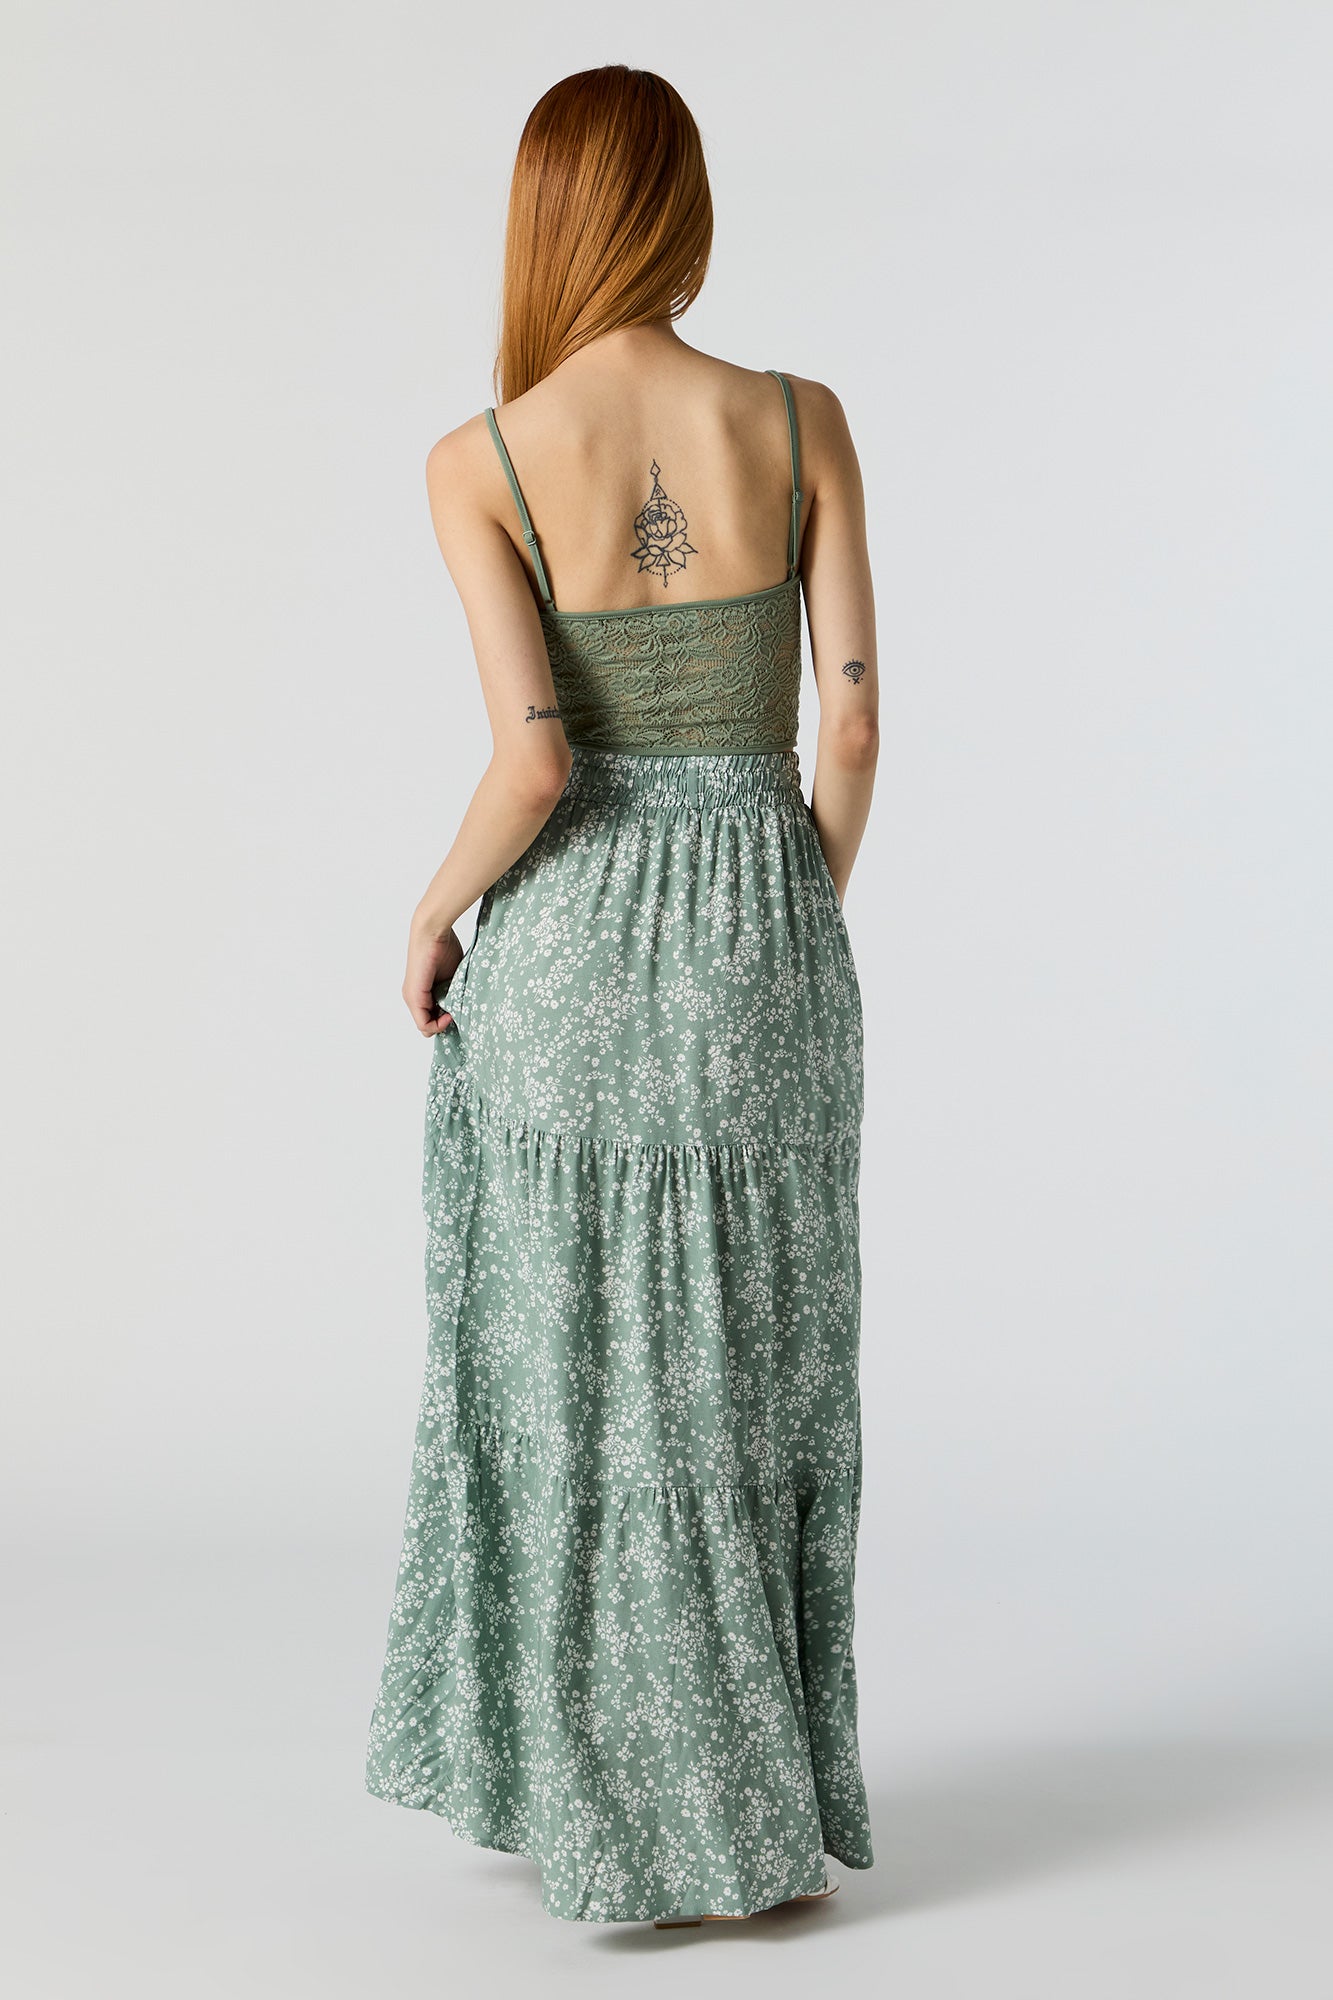 Green Floral High Rise Tiered Maxi Skirt